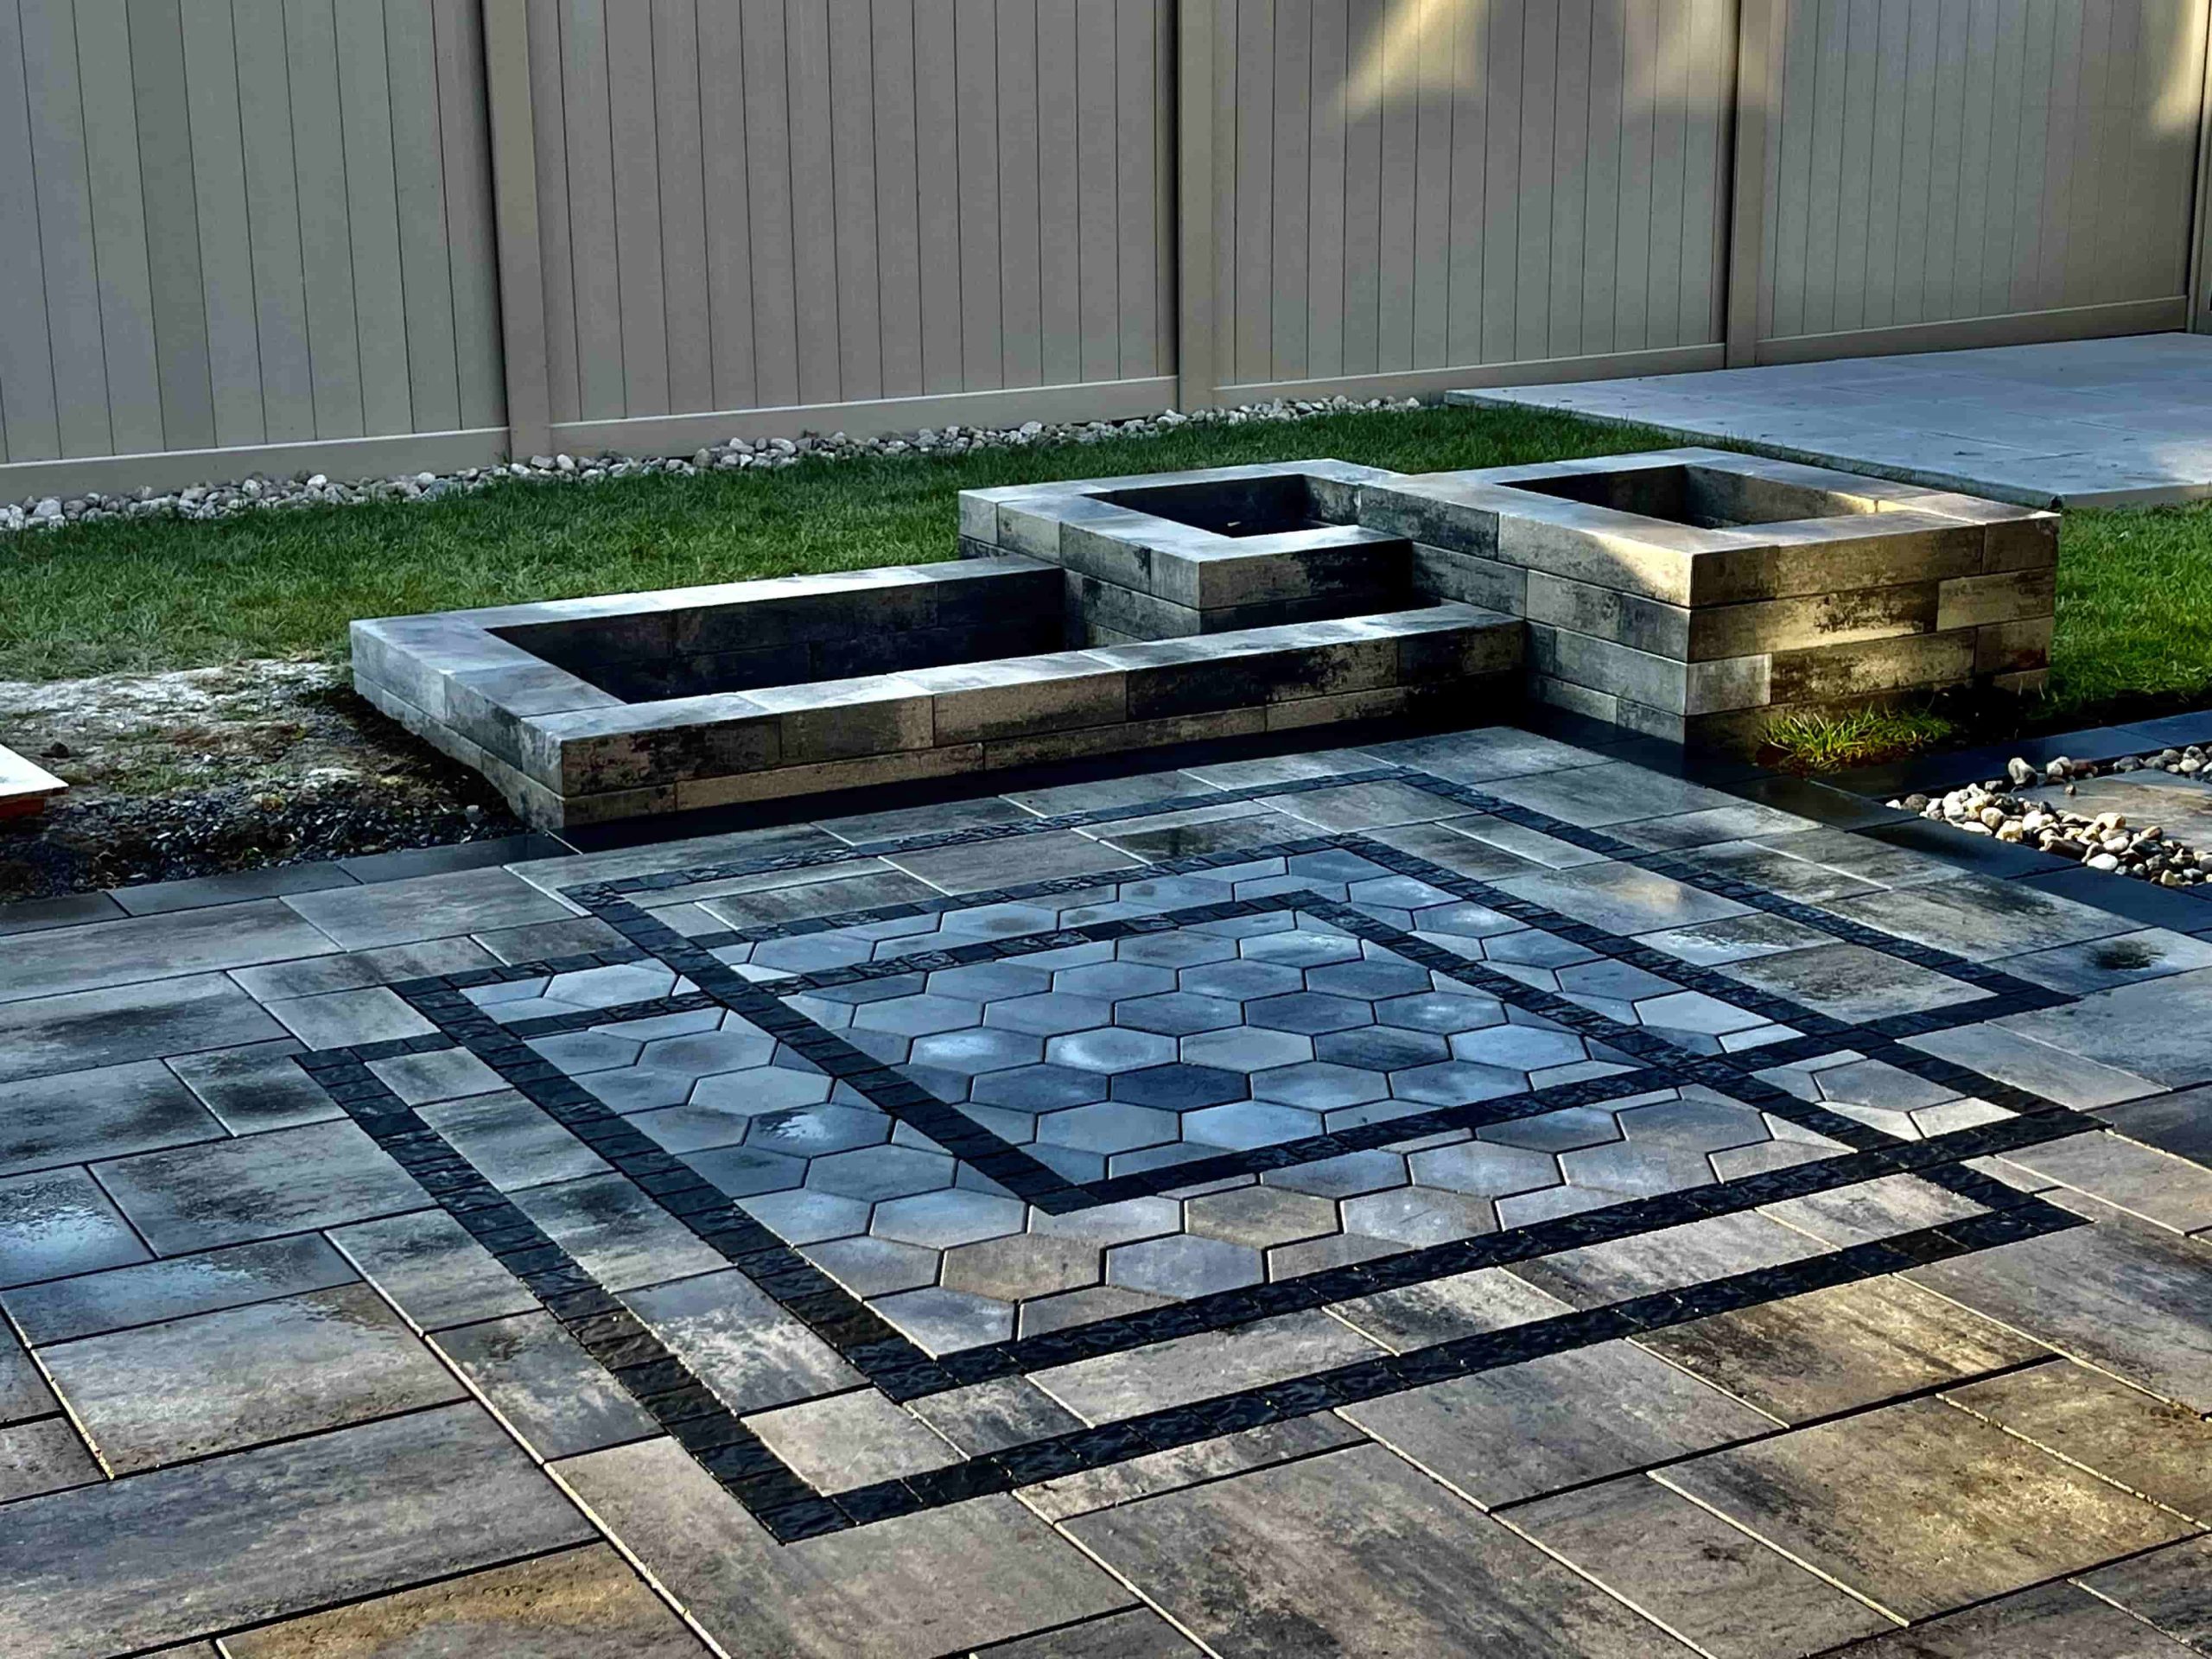 A meticulously designed patio with interlocking stones in a geometric pattern. The central area showcases hexagonal stones bordered by a double row of darker, contrasting stones, creating an elegant focal point.